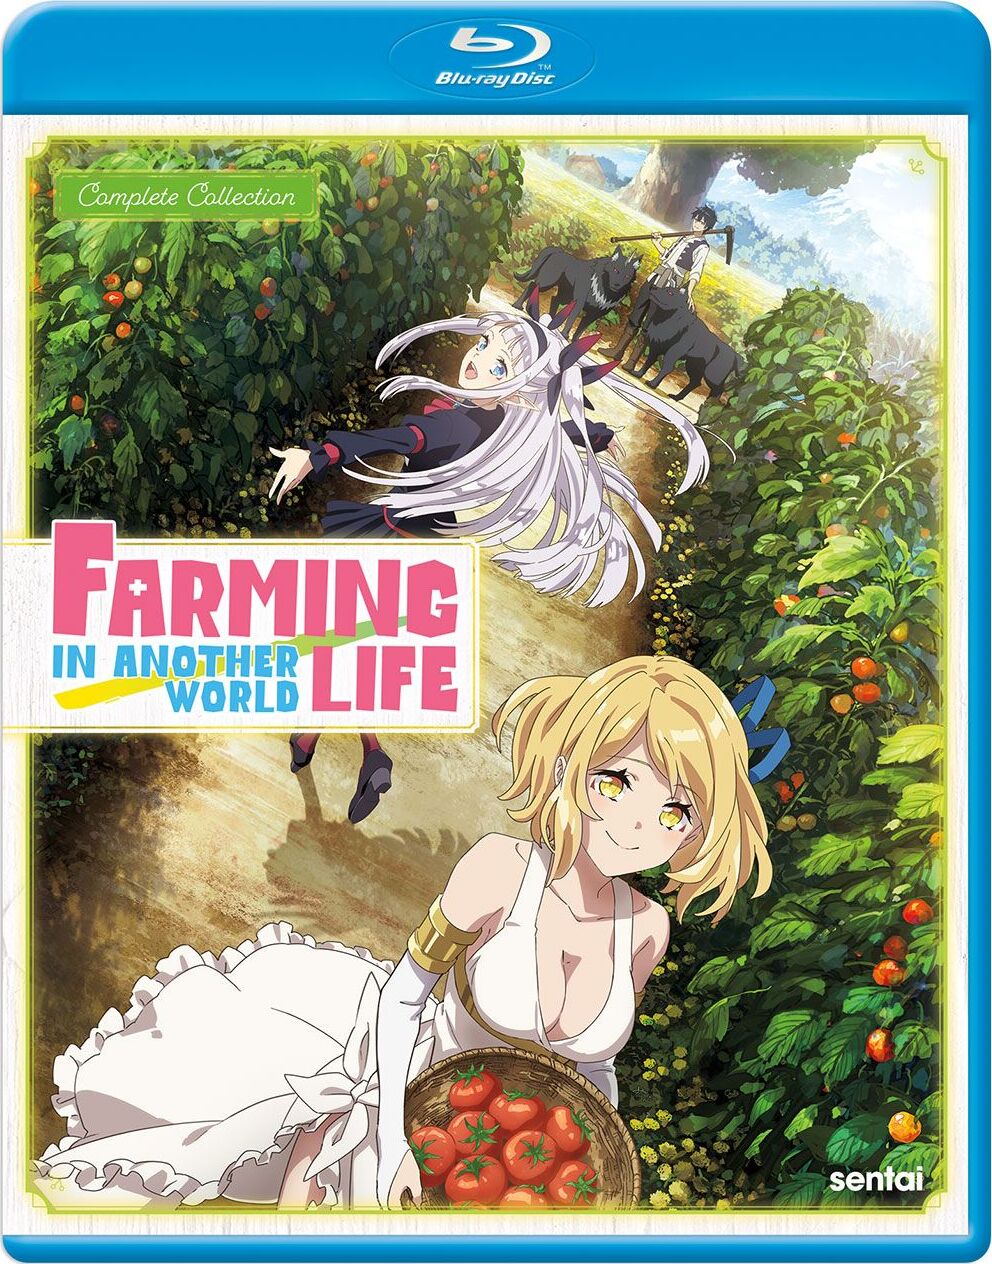 Farming Life in Another World